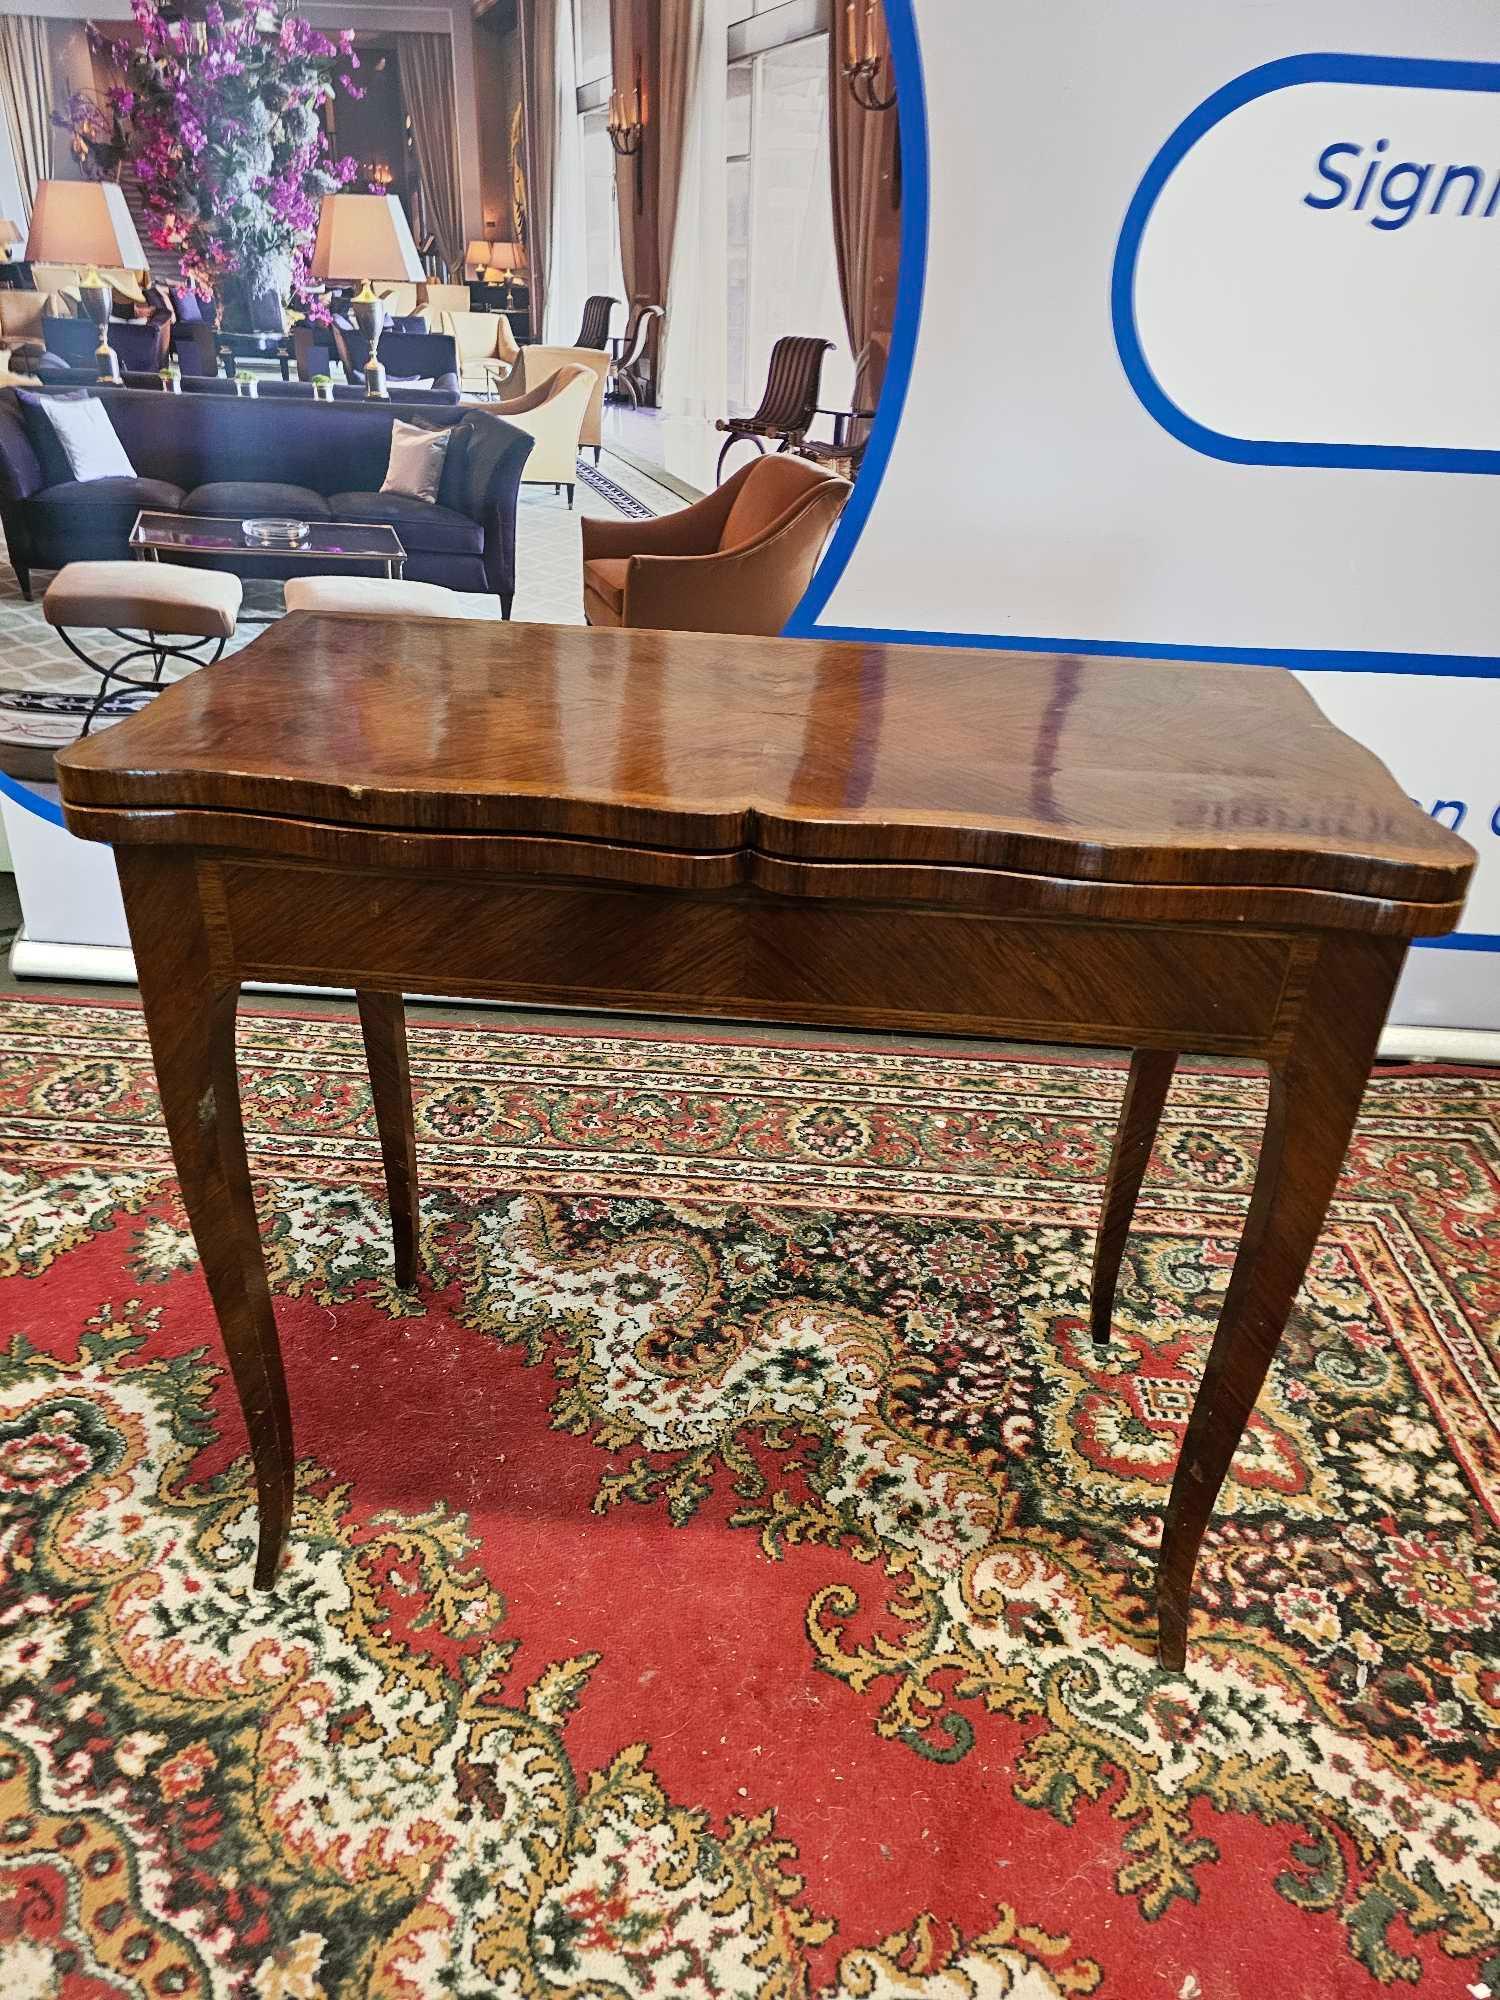 A George III Style Mahogany Serpentine Shape Top Card Table Mounted On Tapering Legs 85 x 43 x